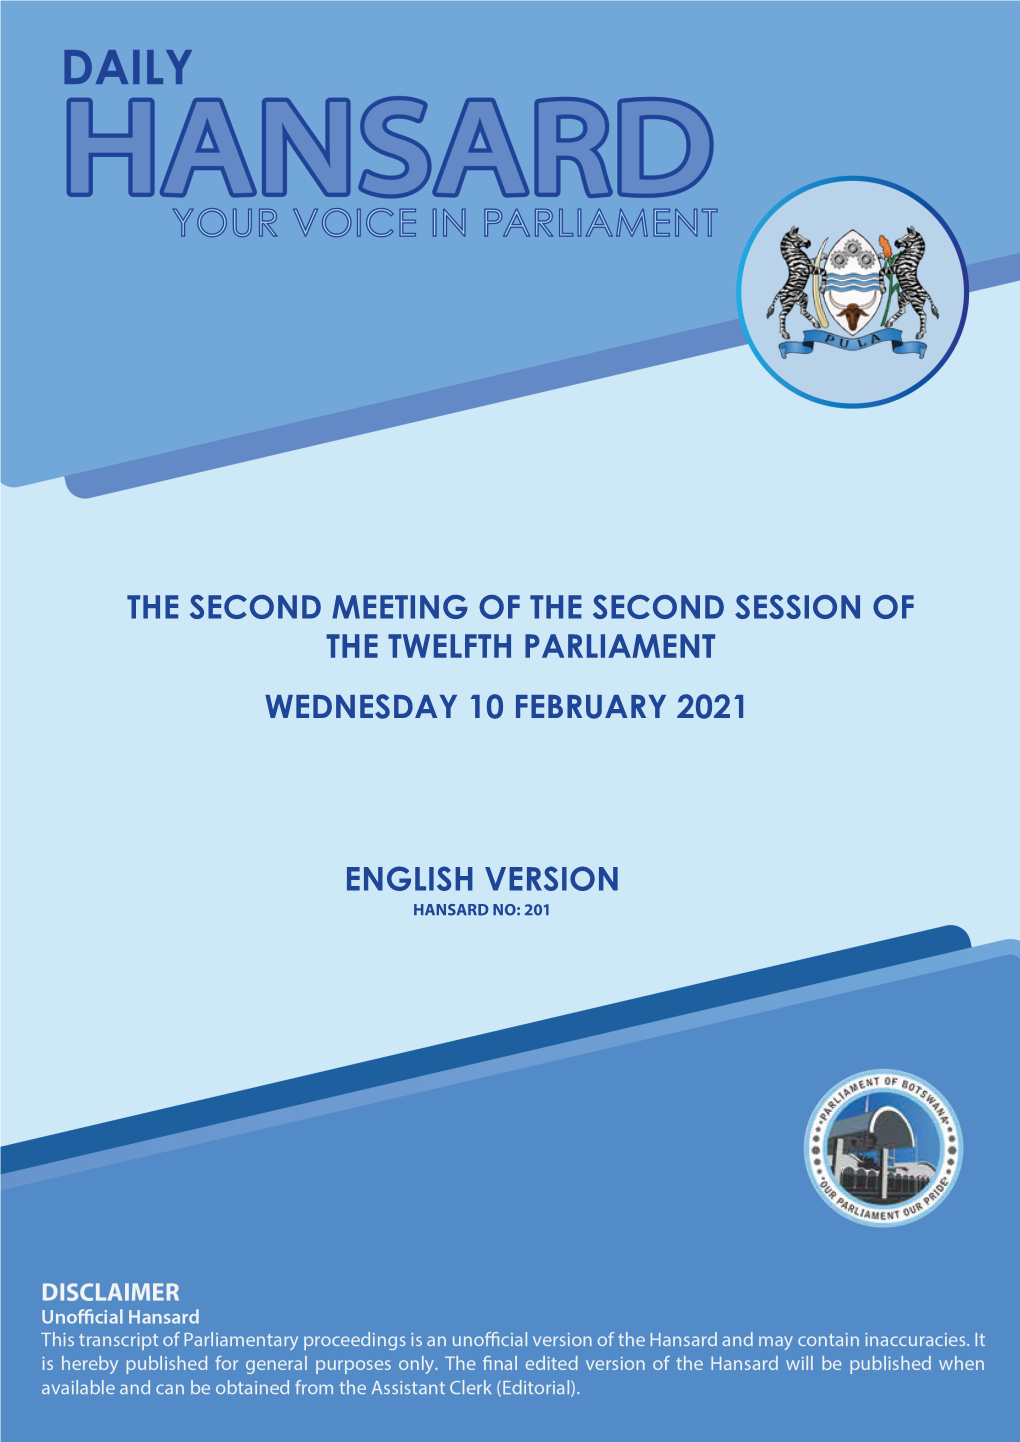 Wednesday 10 February 2021 the Second Meeting of The